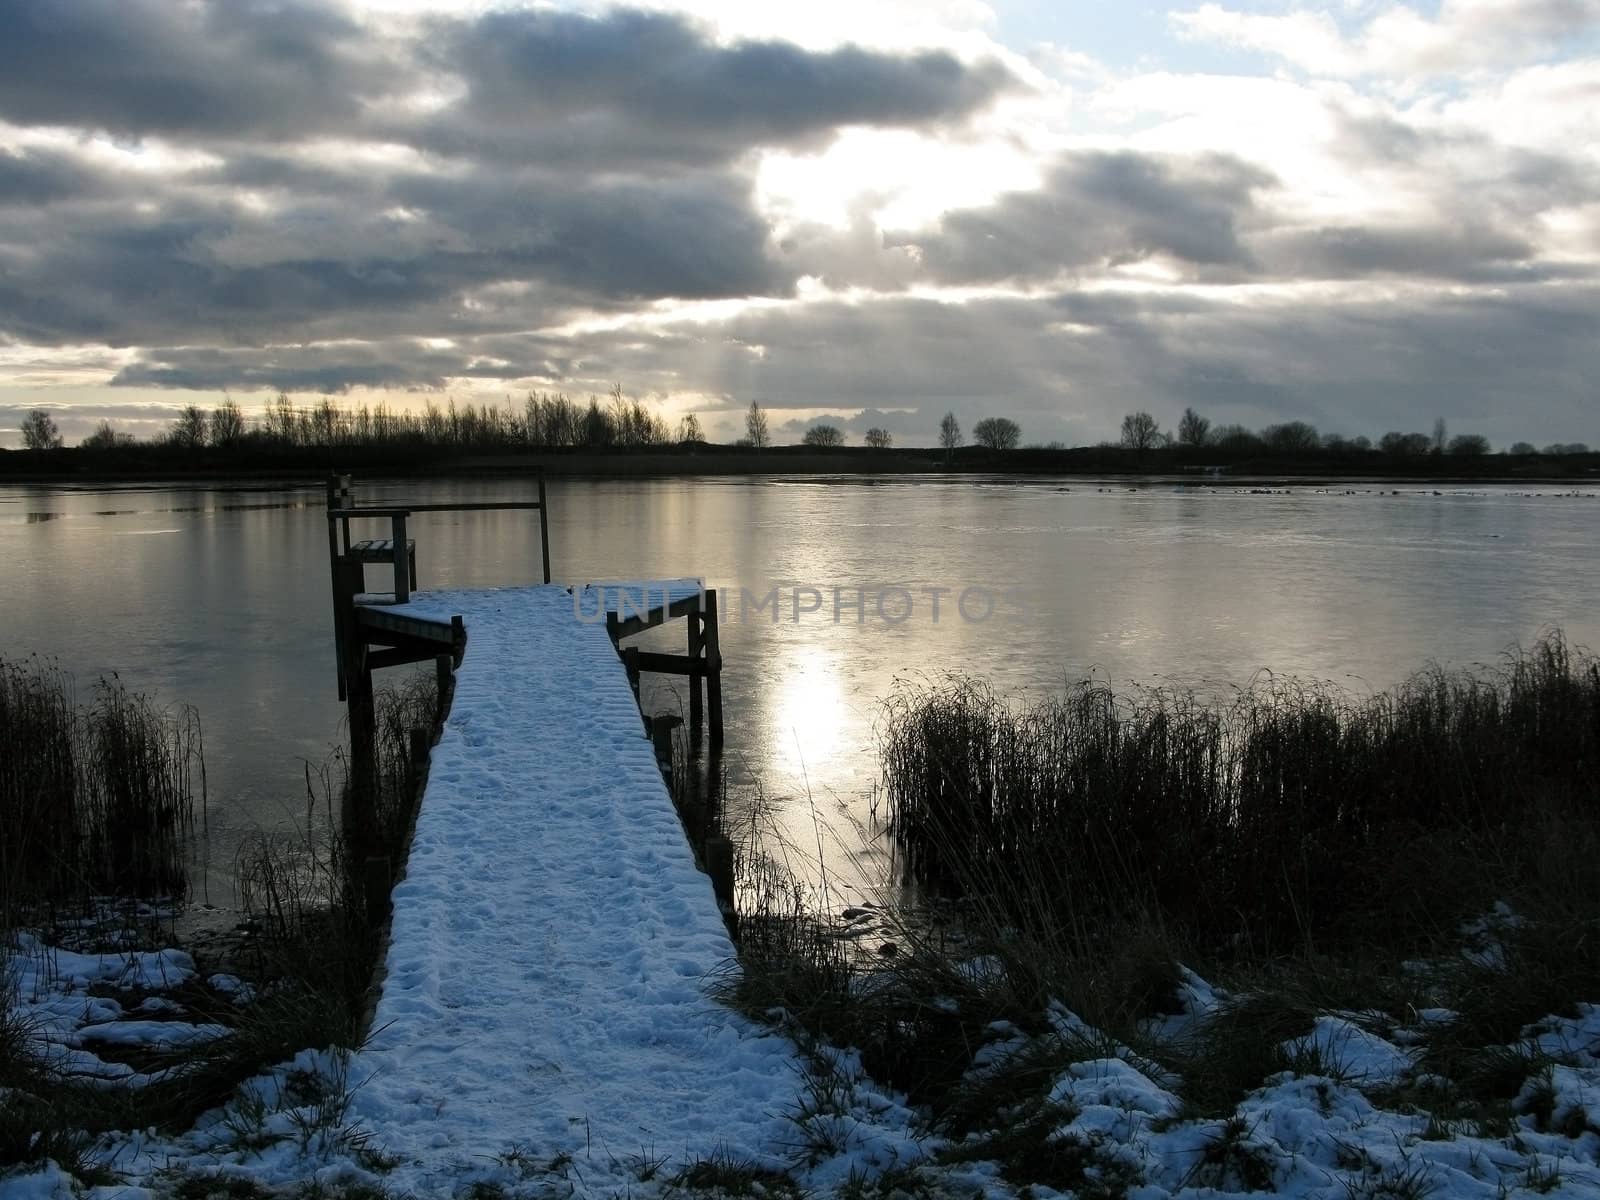 fishing bridge on a frozen lake in winter, covered by snow